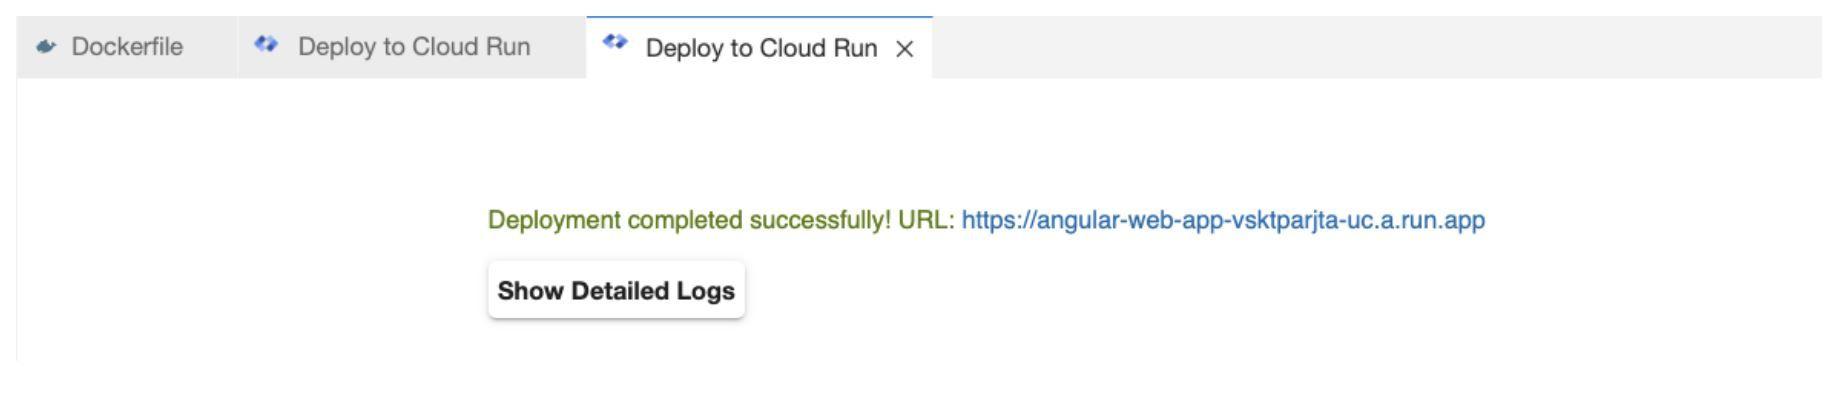 Screenshot displaying the message 'Deployment completed successfully!' and the deployment URL for the Angular service.
